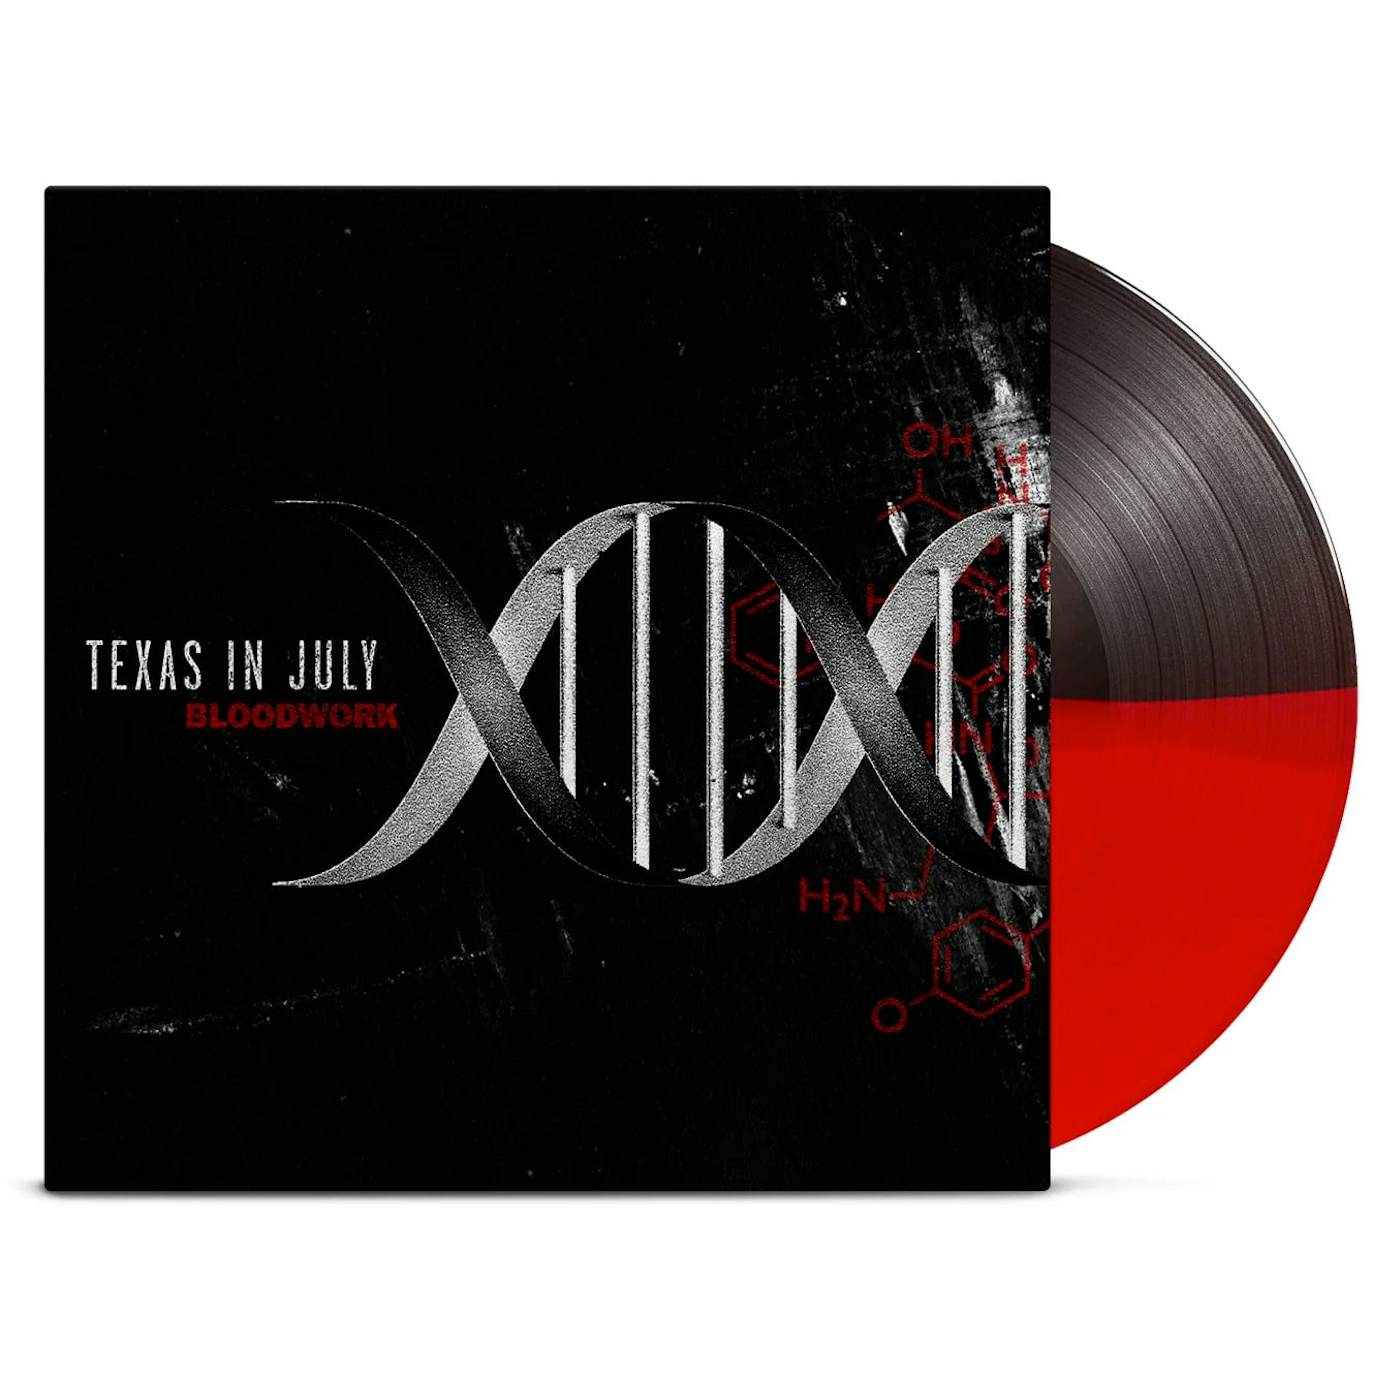 Texas In July "Bloodwork" 2x12"